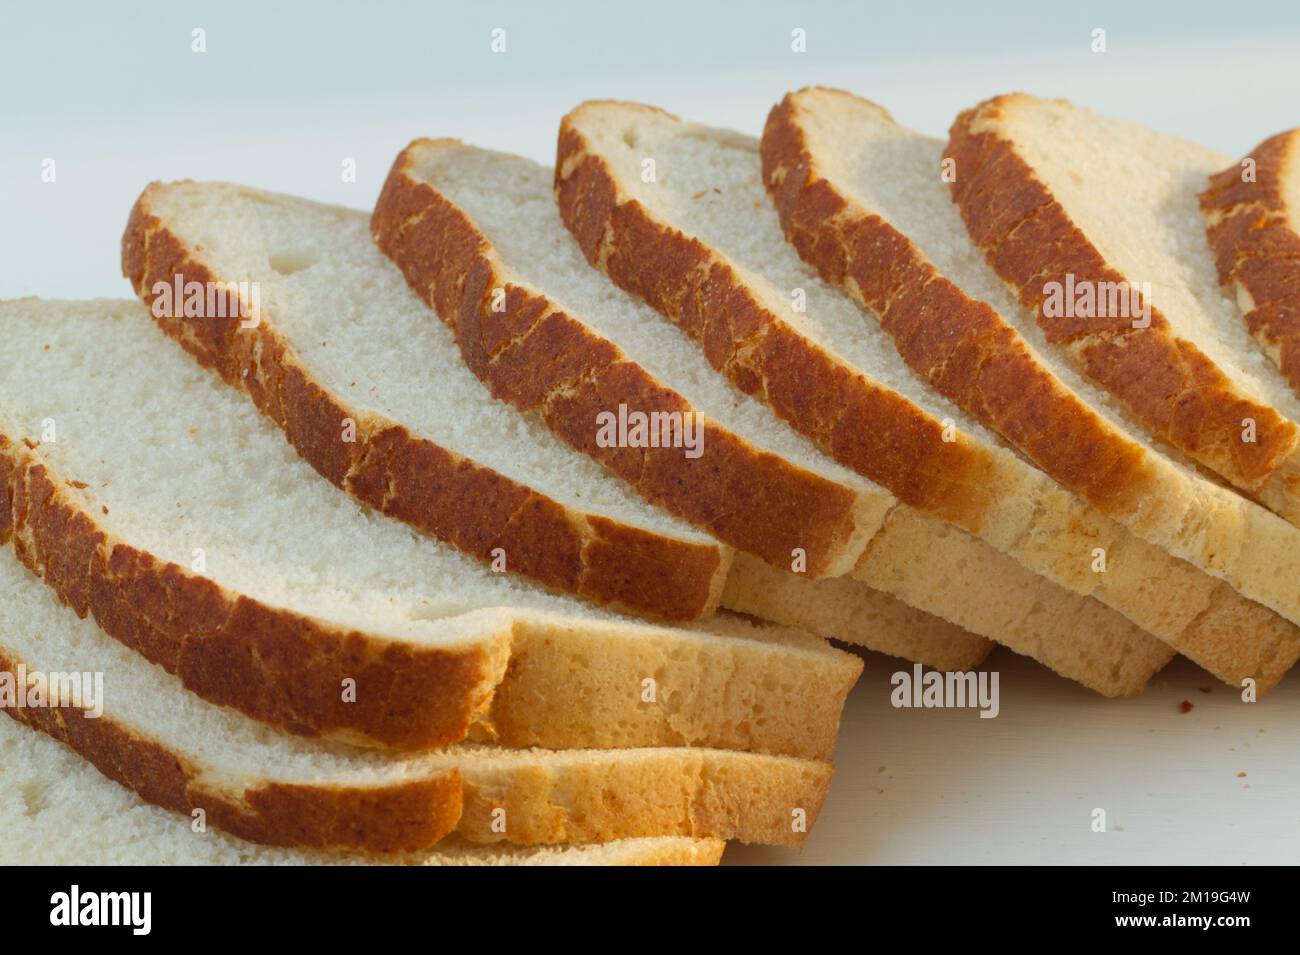 Slices of Tiger bread on a white background Stock Photo